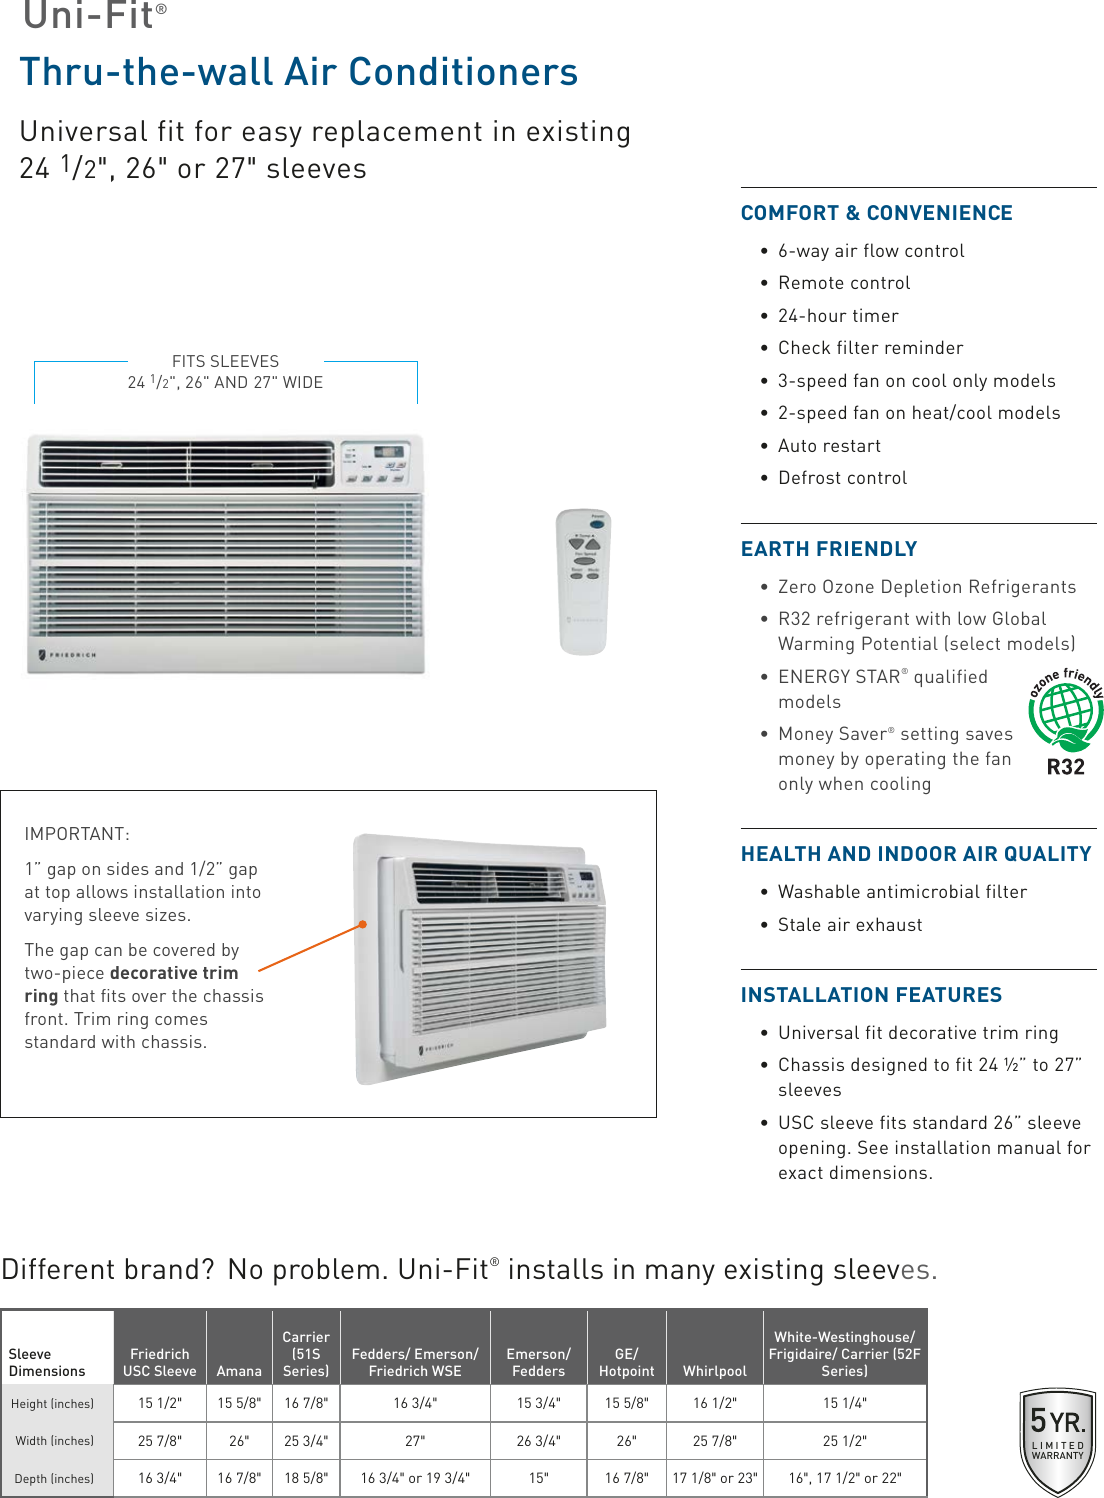 Page 2 of 4 - Friedrich  2018 Uni-fit Thru-the-wall Air Conditioners Brochure